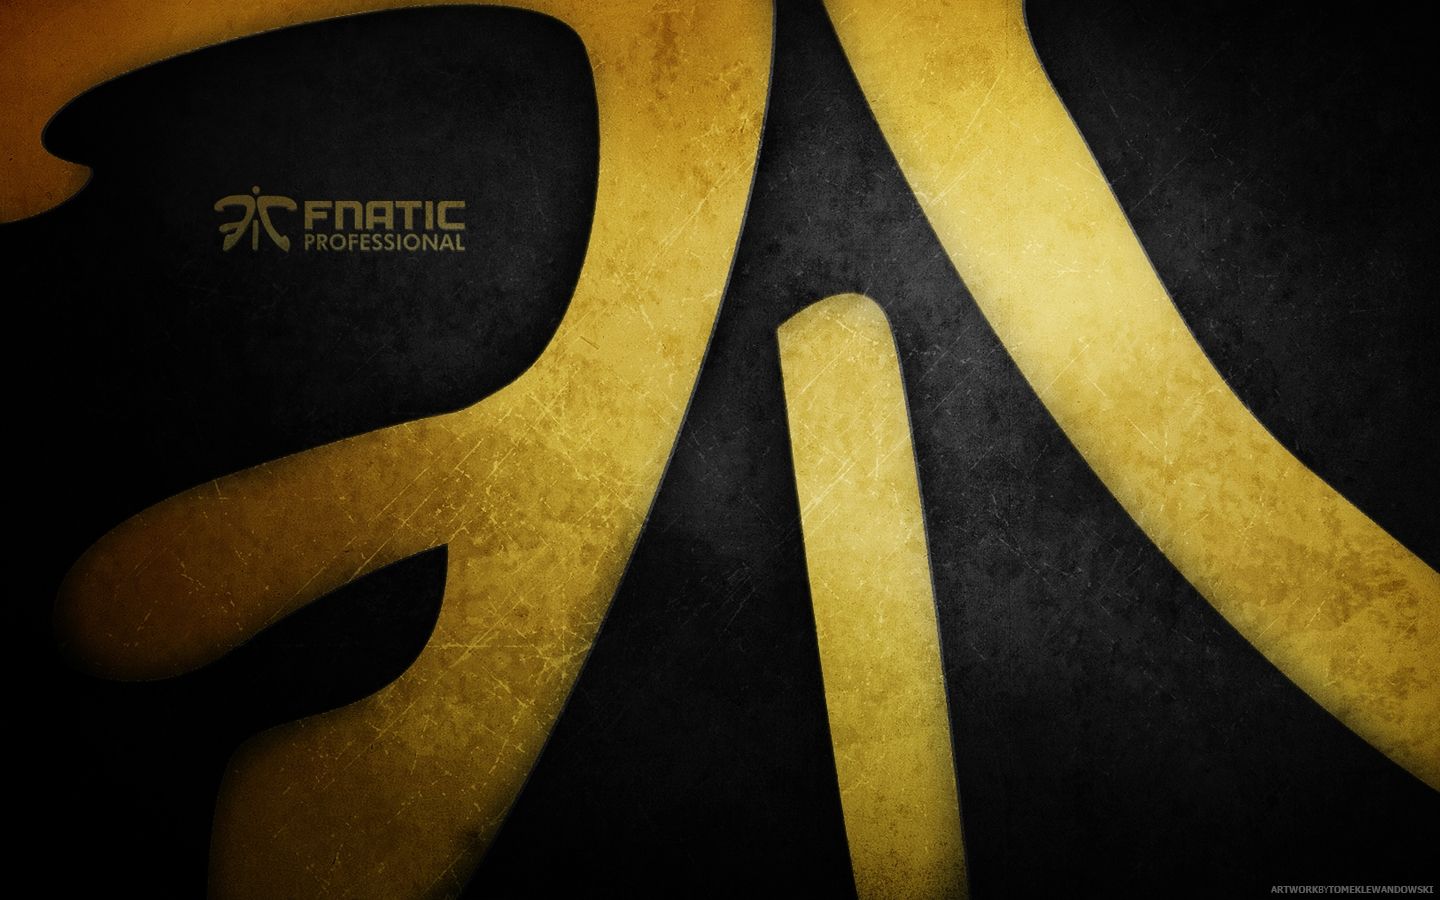 FNATIC.com Fnatic wallpapers have arrived